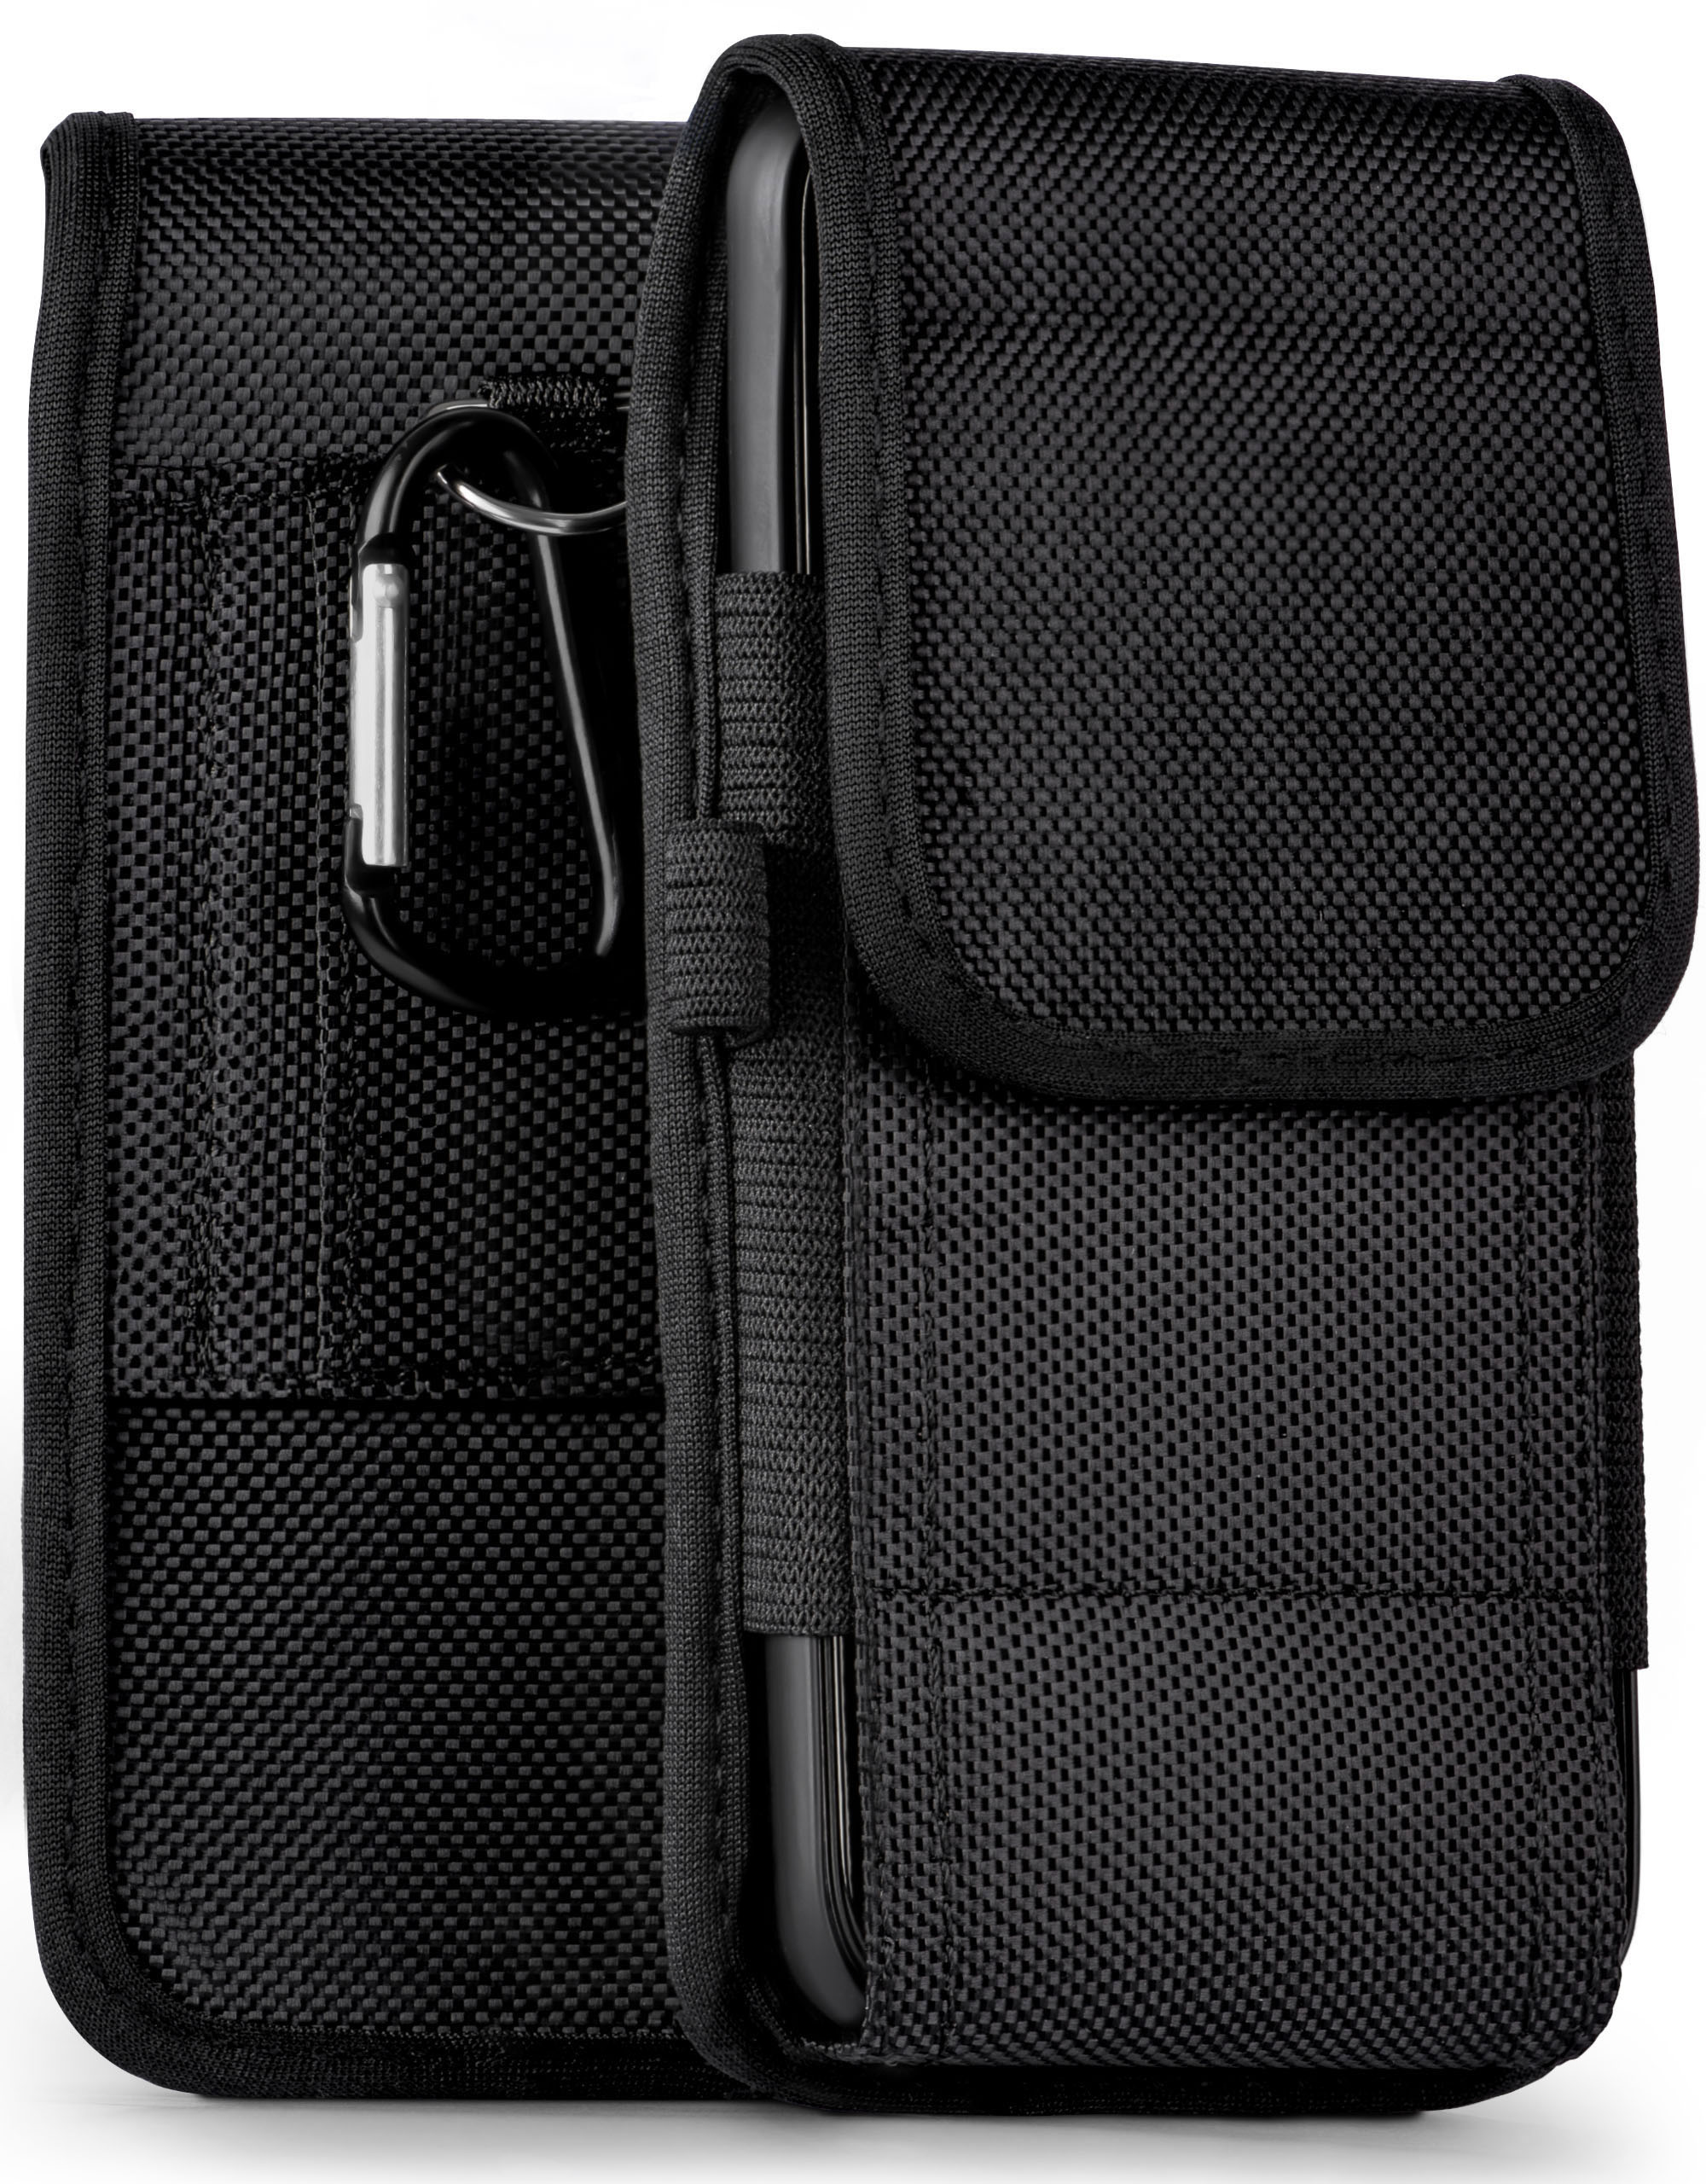 MOEX Agility Case, Holster, Trail Blade ZTE, V2020